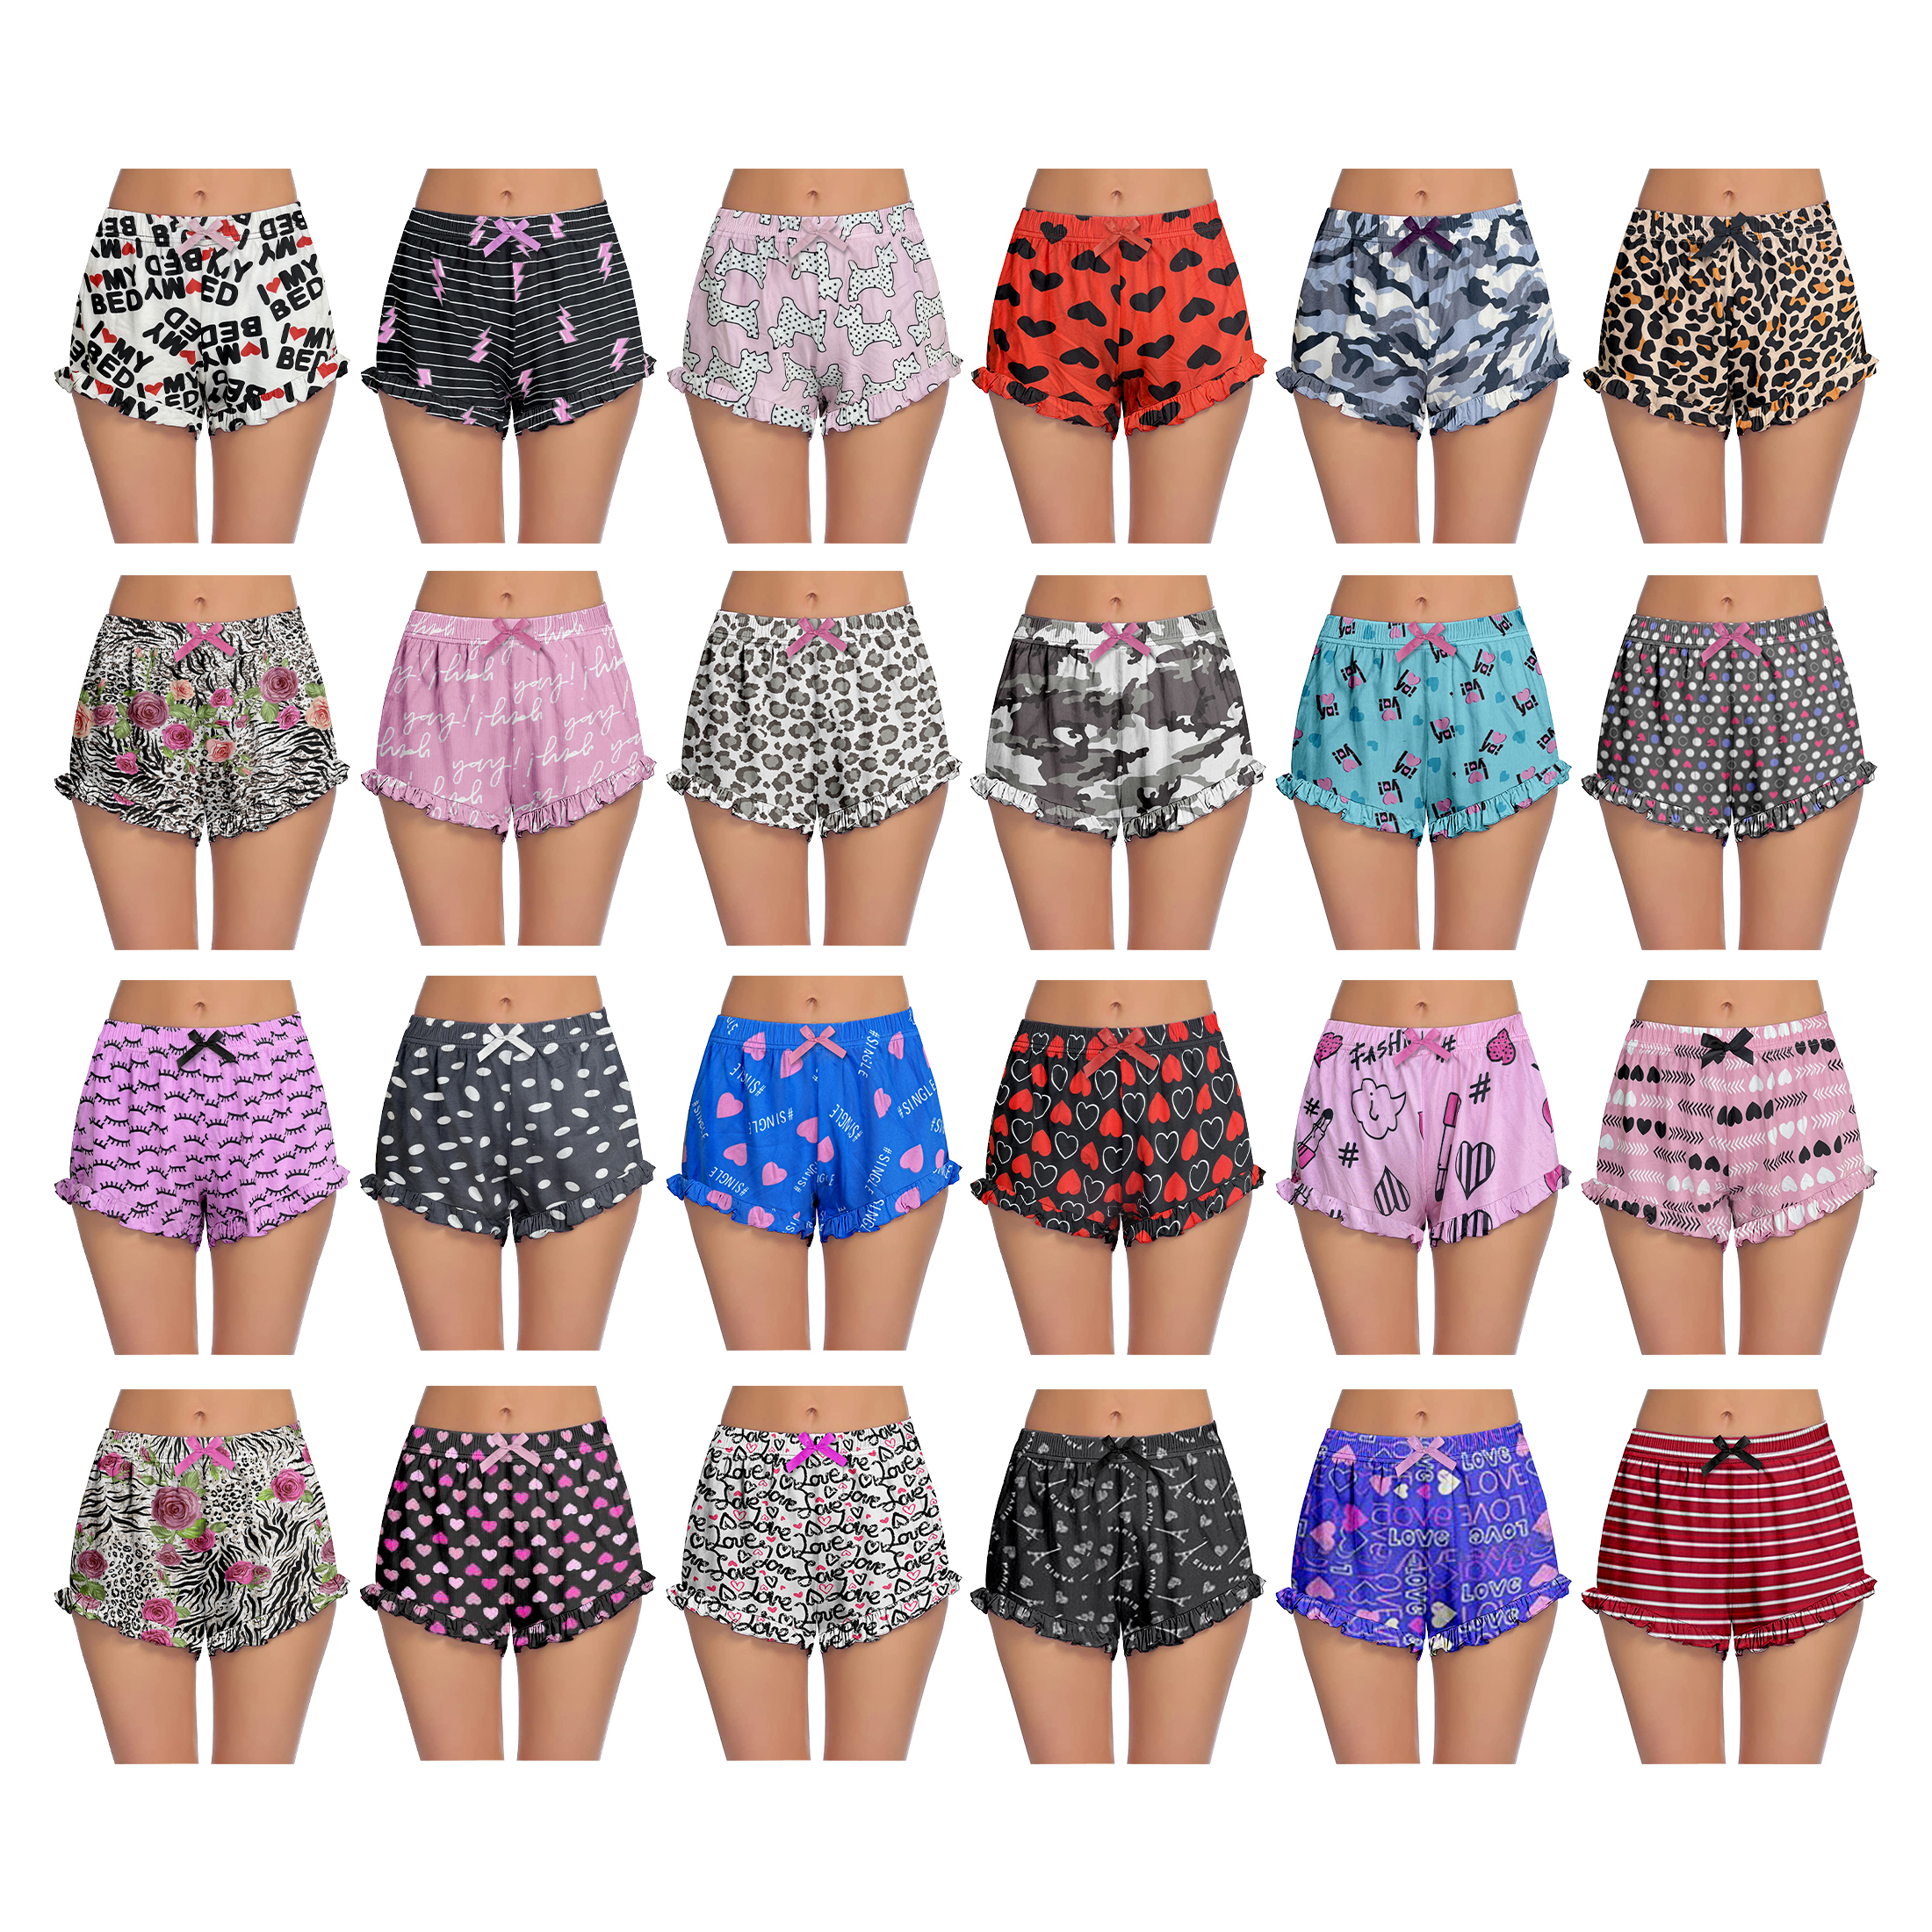 6-Pack Women's Casual Printed Pajama Shorts Soft Stretchy Relaxed Fit Ladies Summer Yoga Bottoms - M